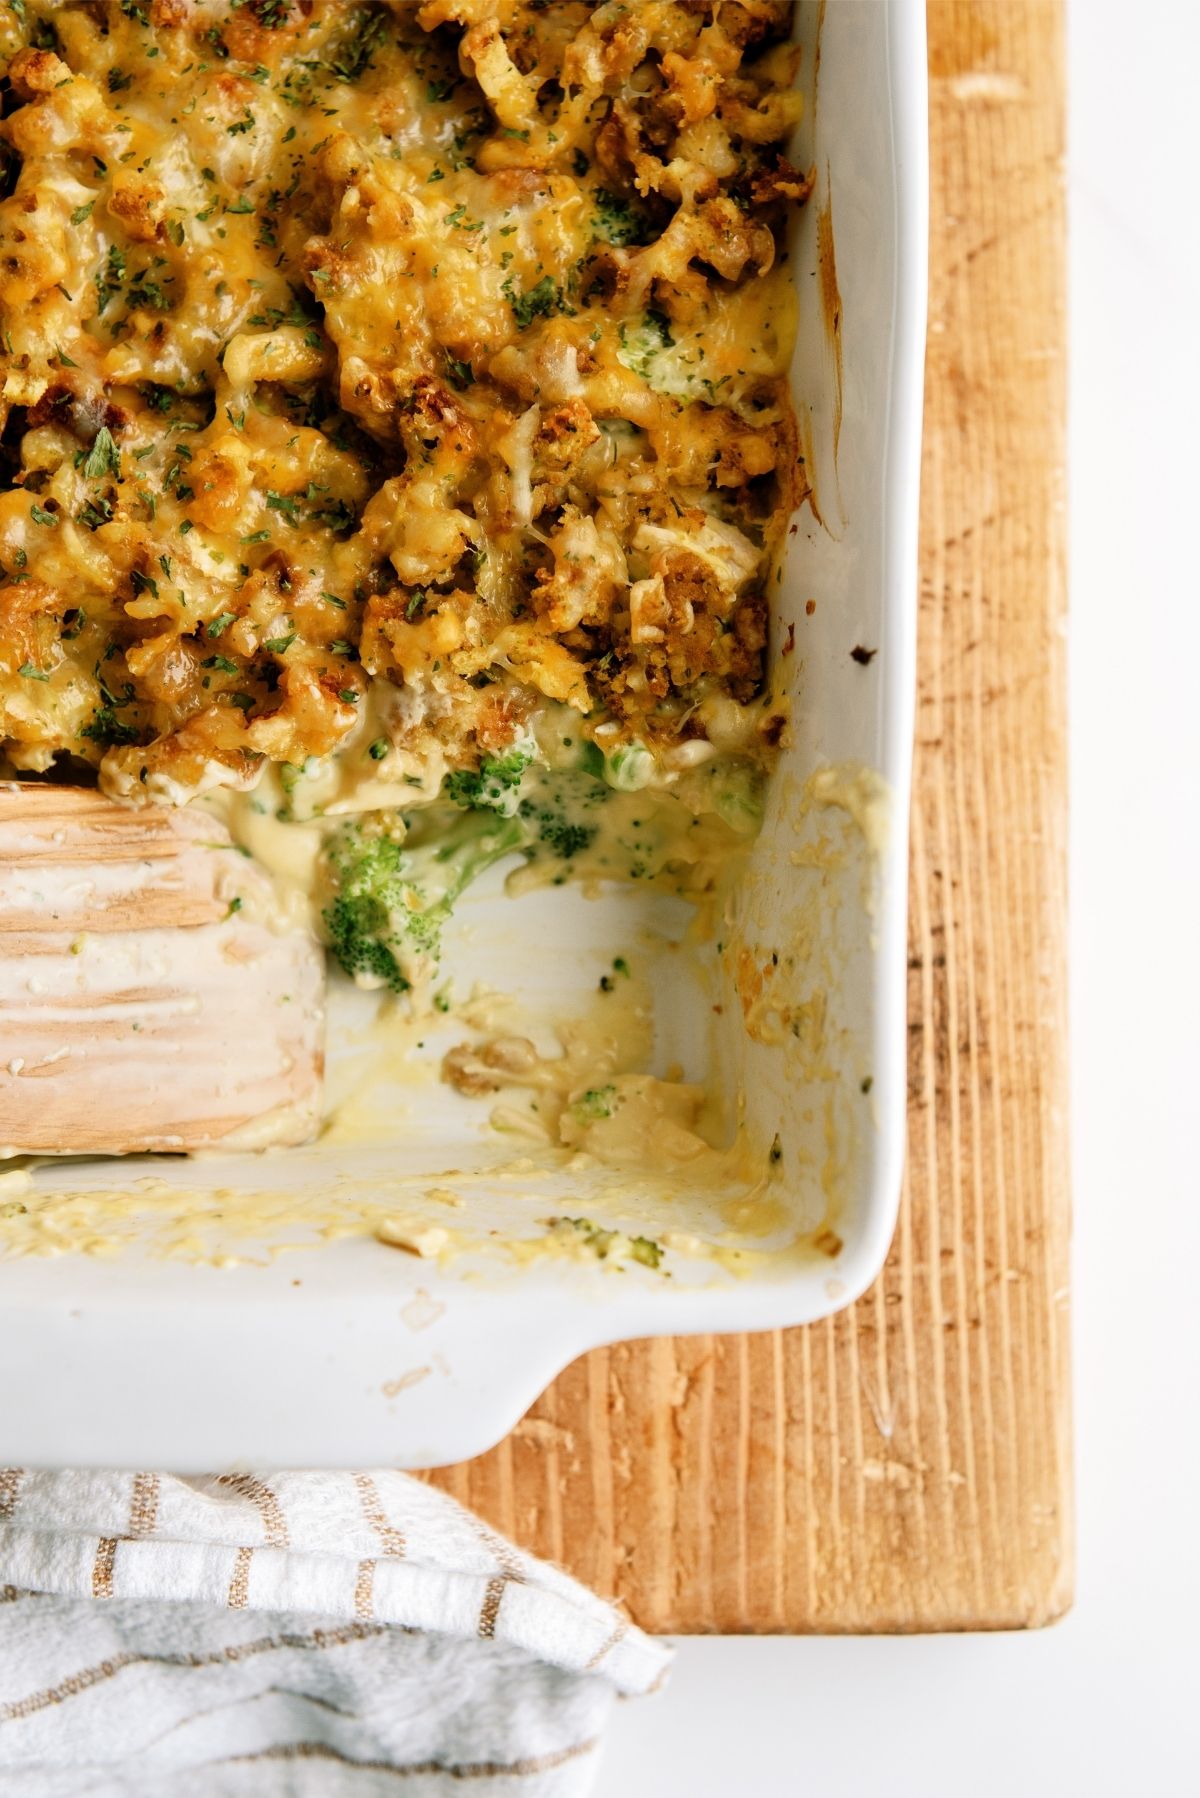 Chicken and Broccoli Stuffing Casserole in a casserole dish missing a serving